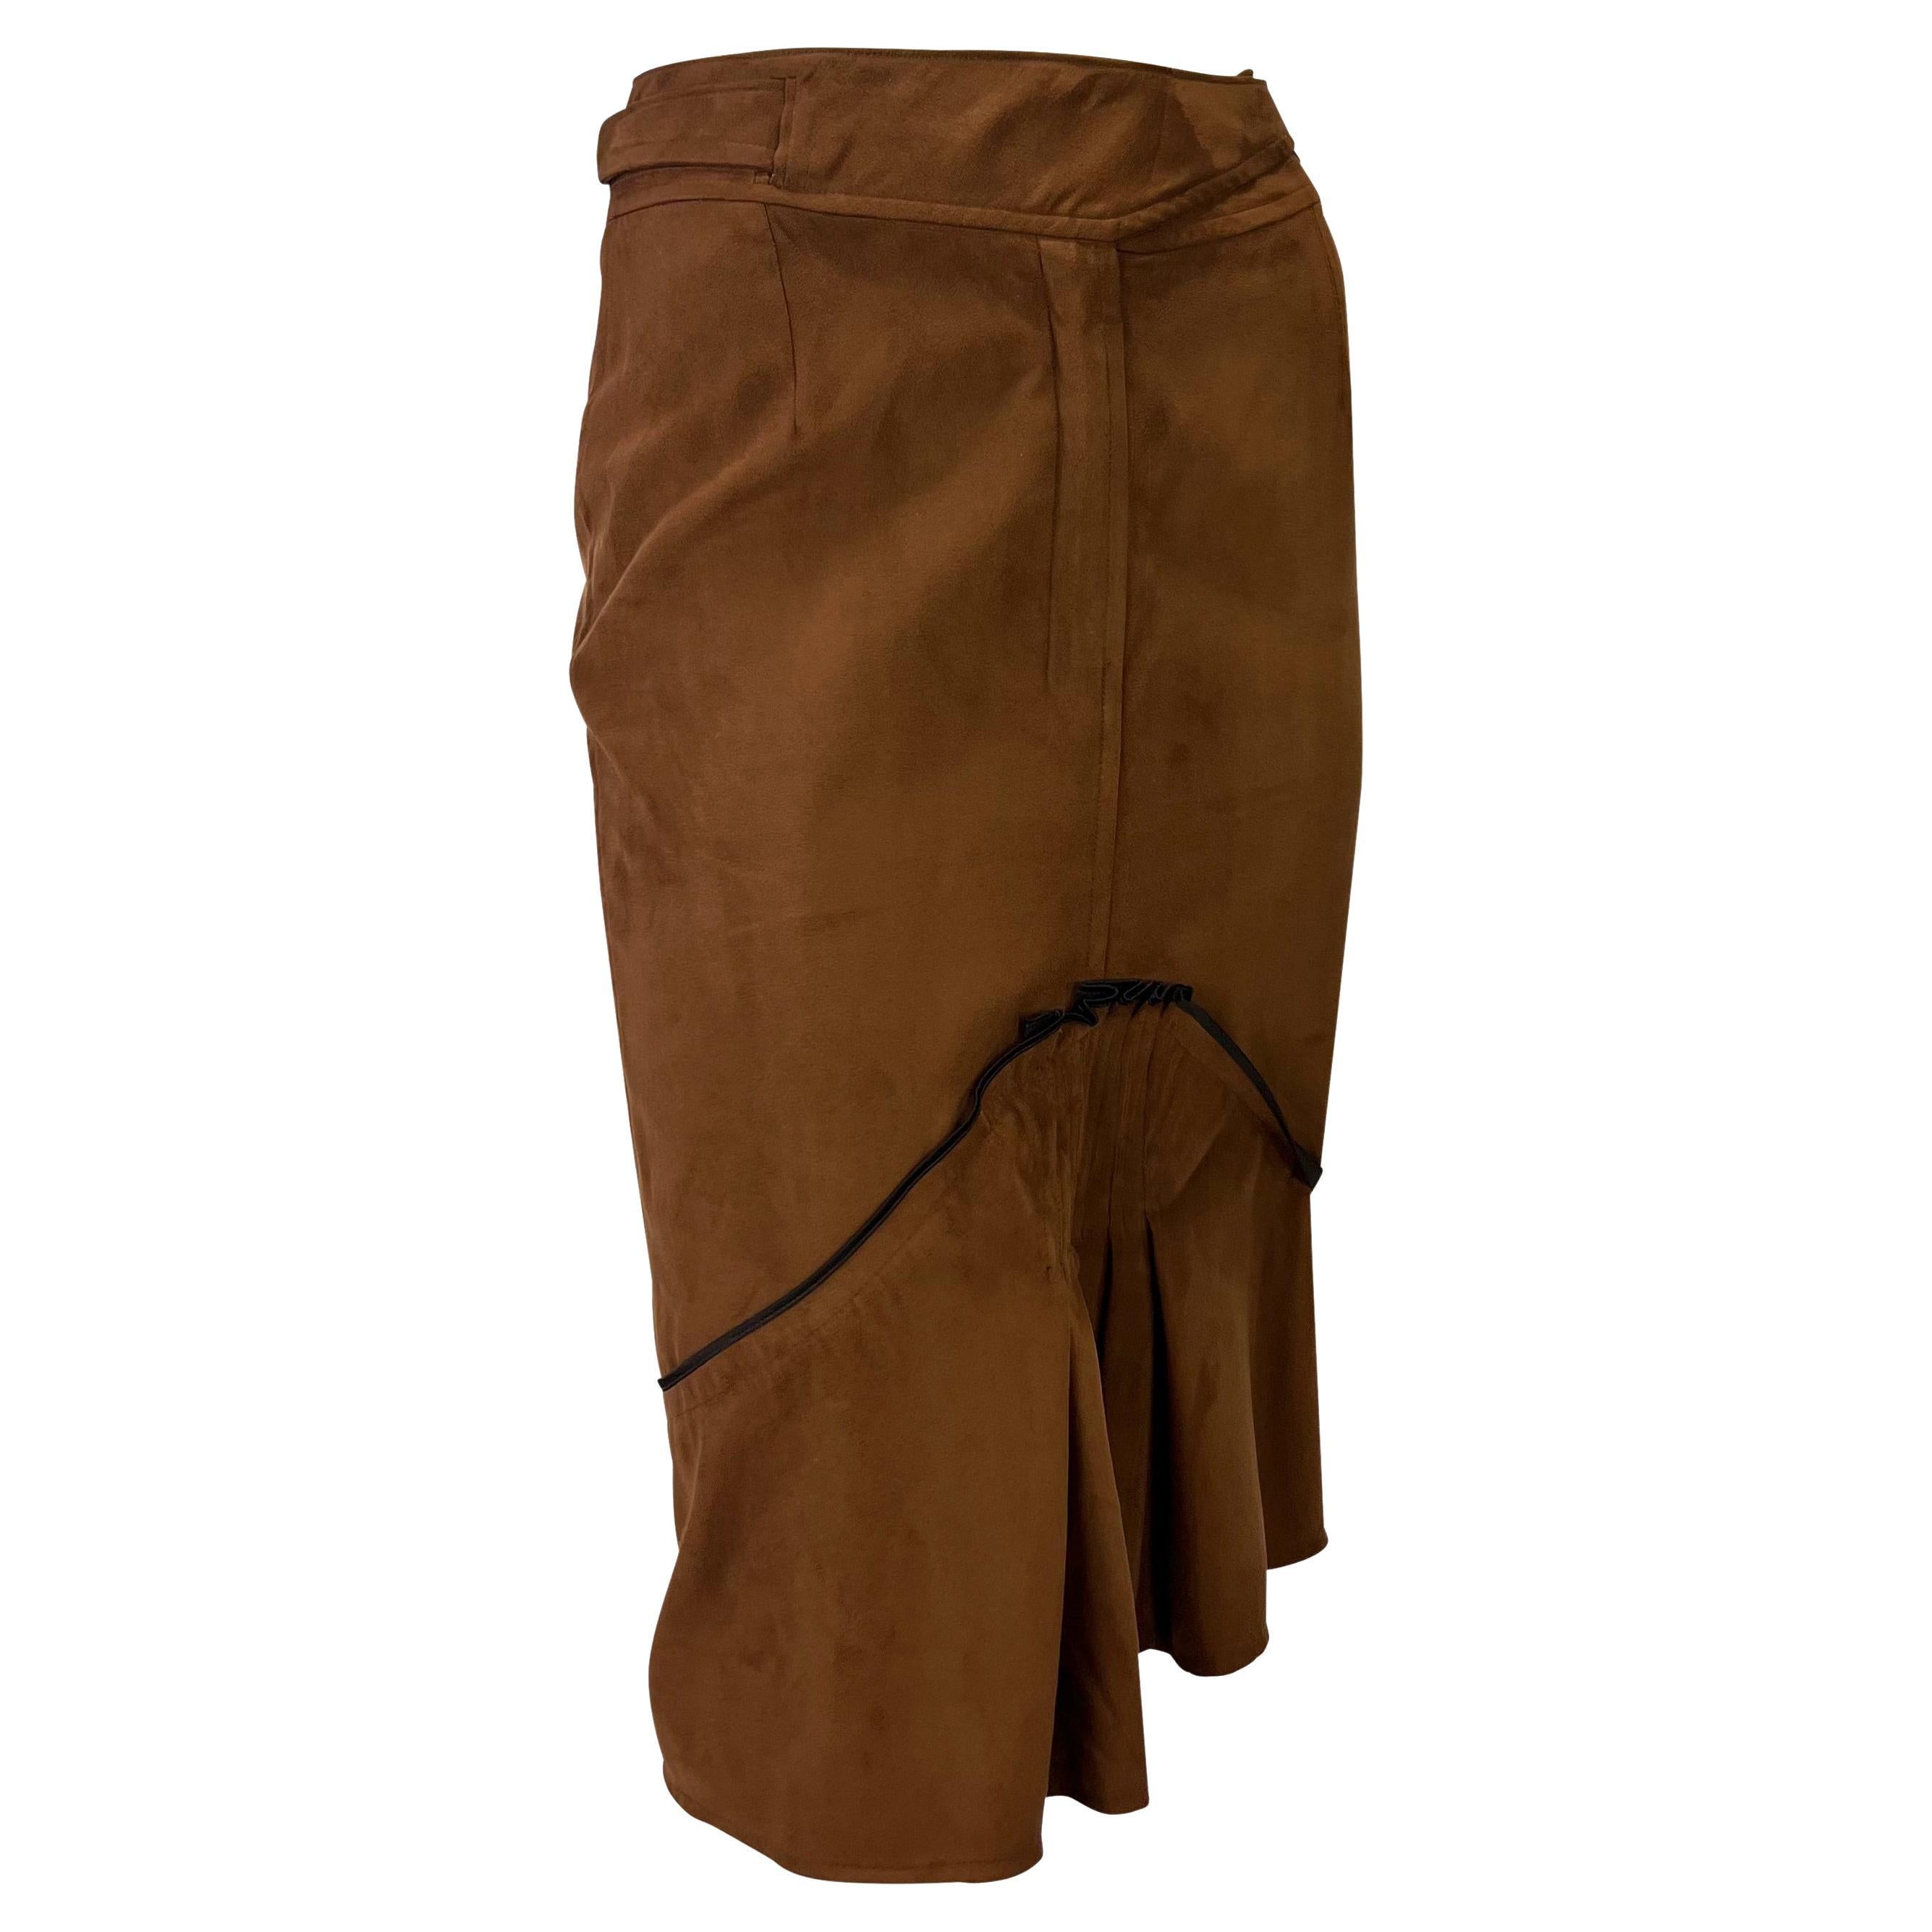 S/S 2003 Yves Saint Laurent by Tom Ford Brown Belted Ruffle Vegan Suede Skirt 1